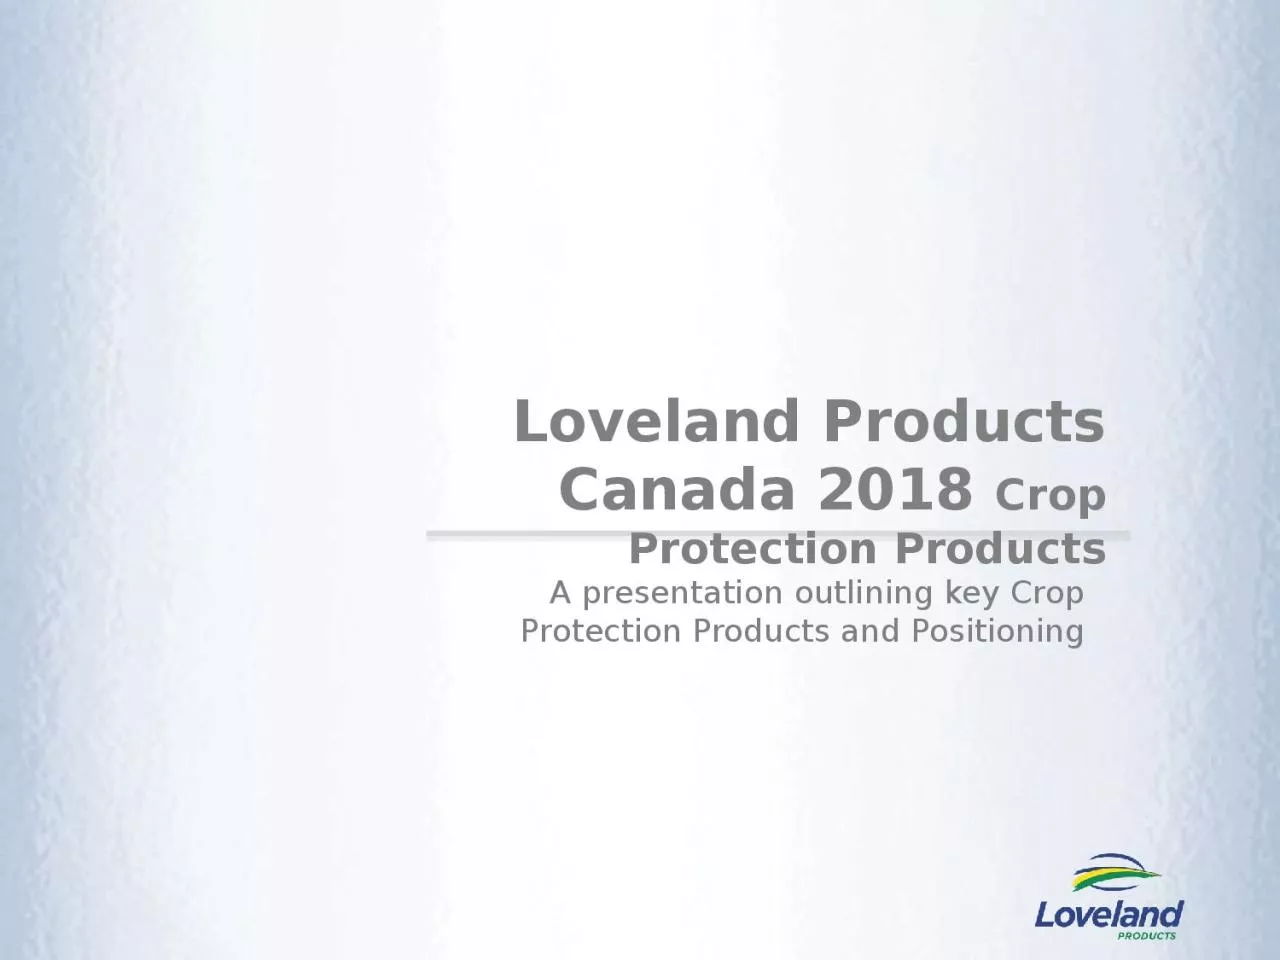 A presentation outlining key Crop Protection Products and Positioning